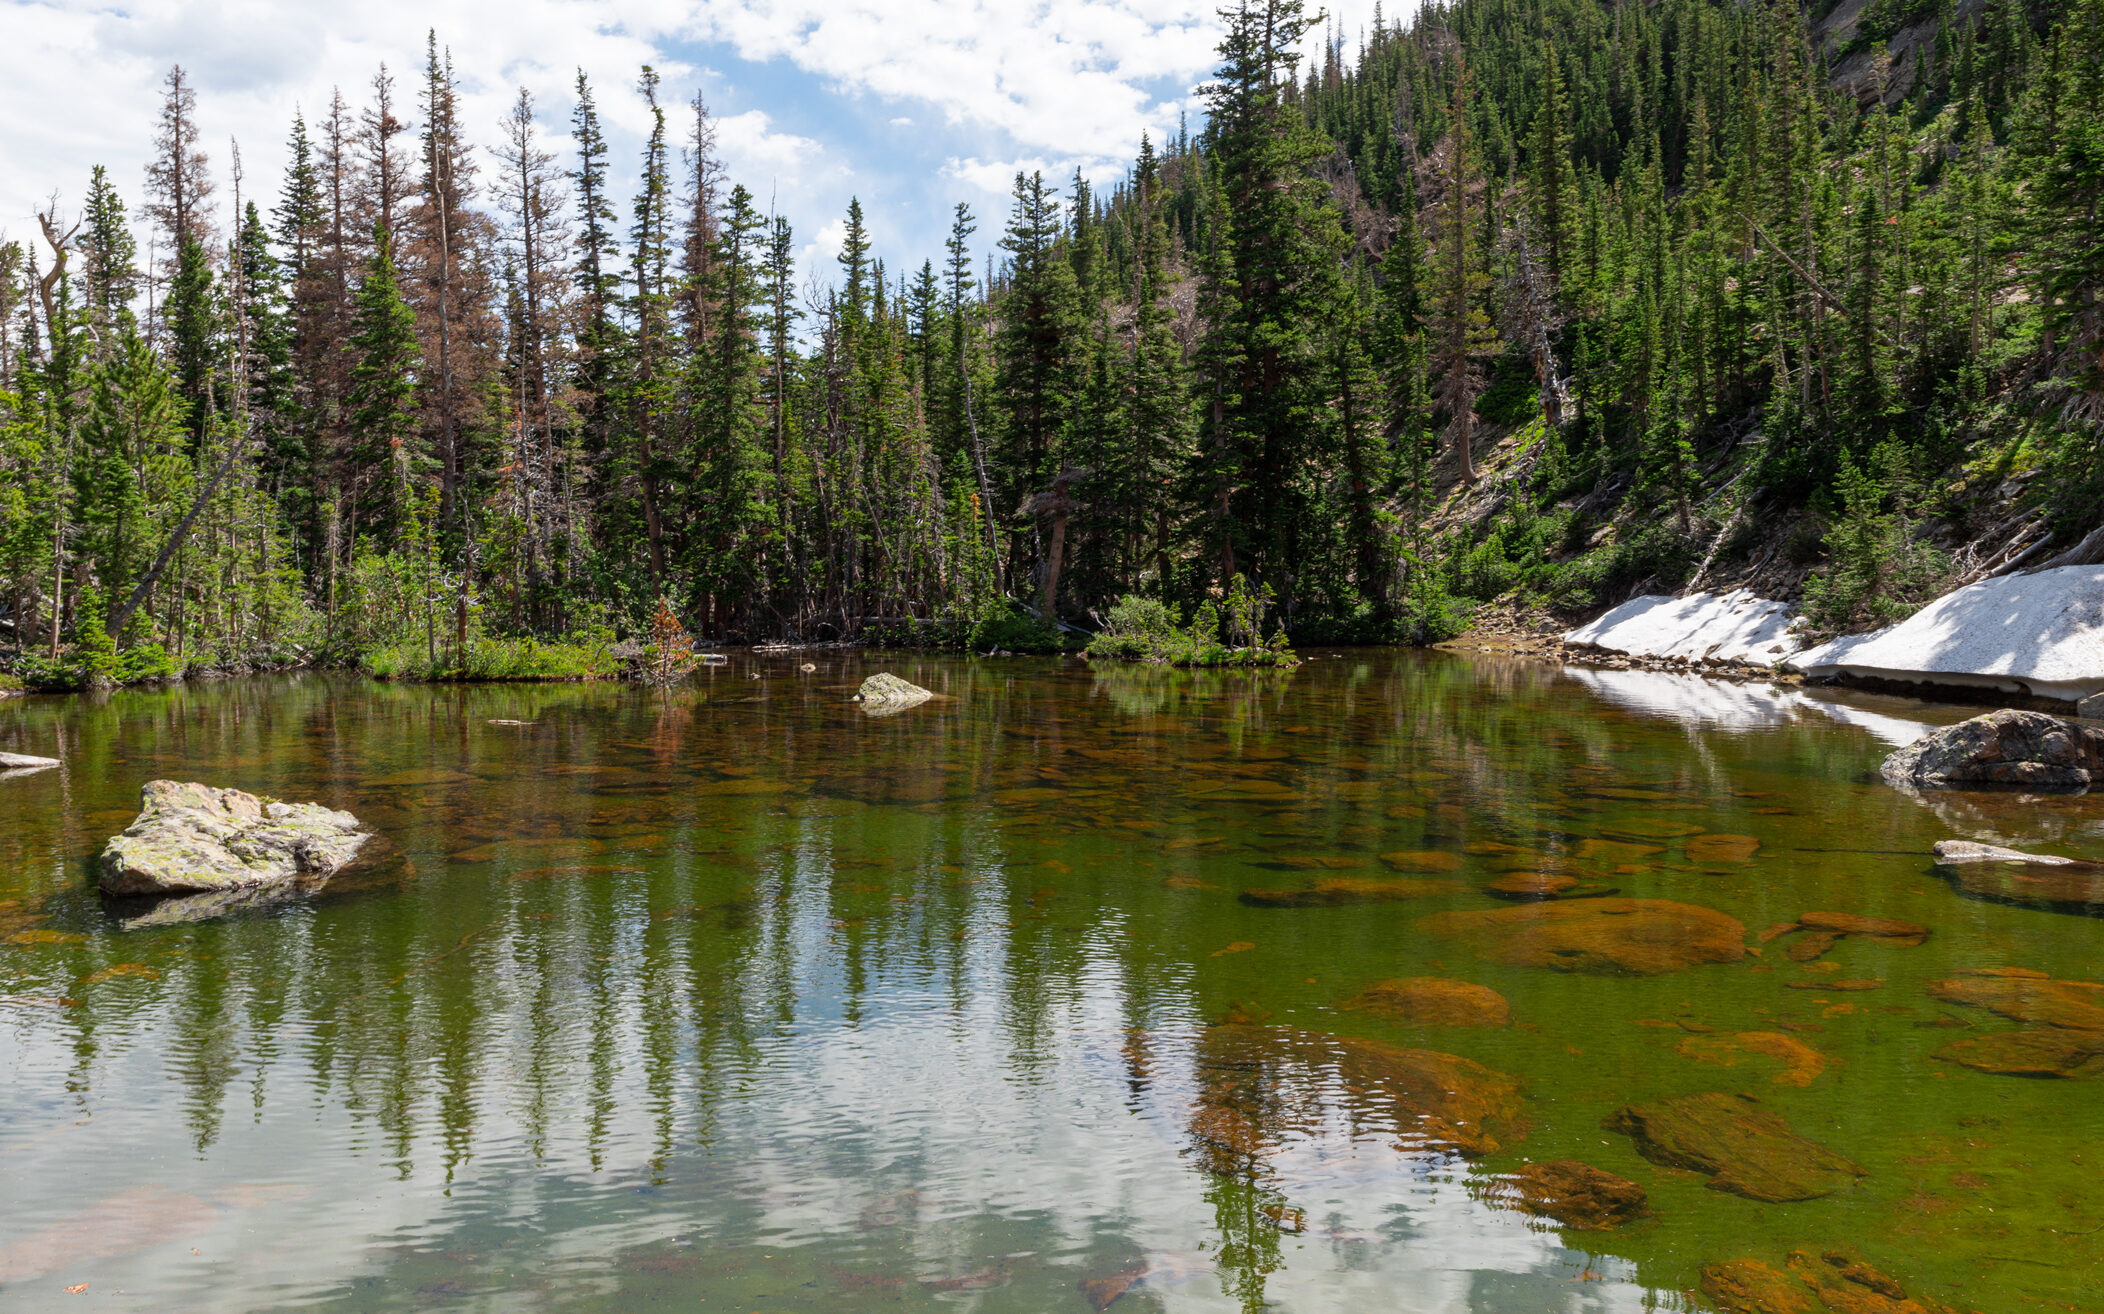 A very shallow, not so much visited alpine lake in Rocky Mountain National Park